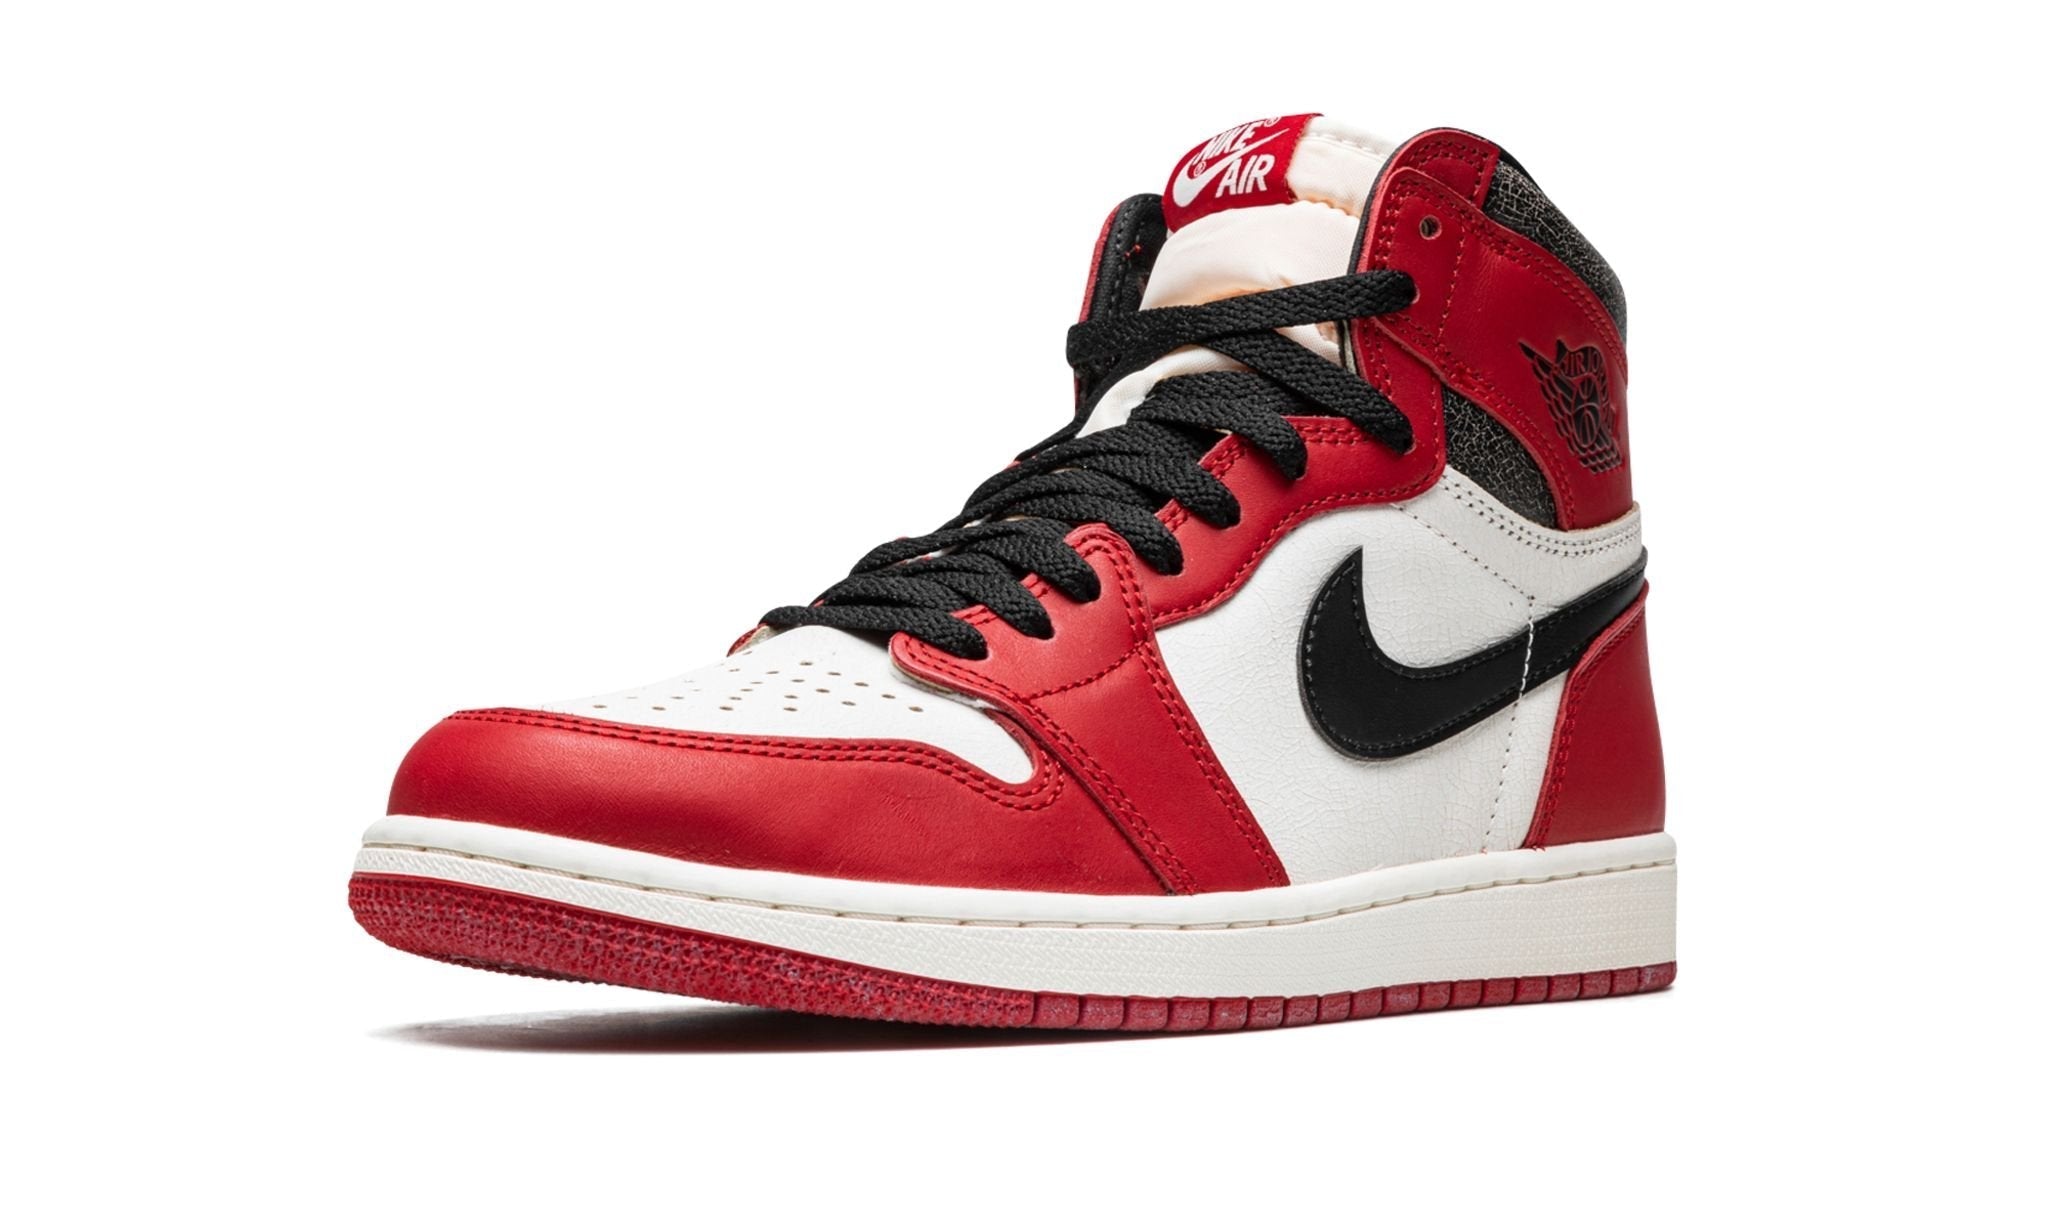 Jordan 1 Retro High OG Chicago Lost and Found GS 